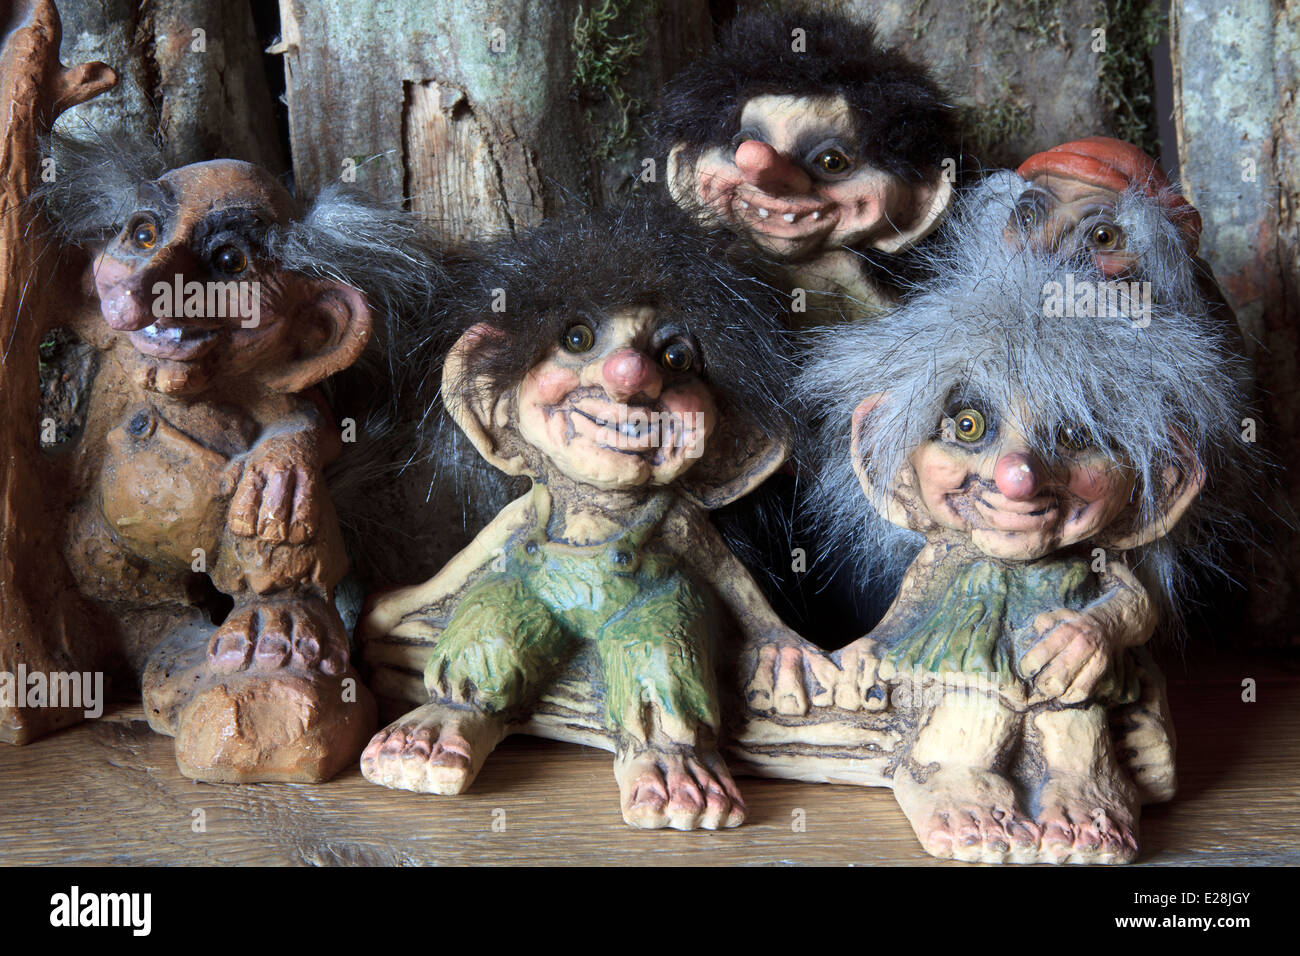 Norwegian trolls souvenirs for sale in a gift shop, Norway, Europe Stock  Photo - Alamy